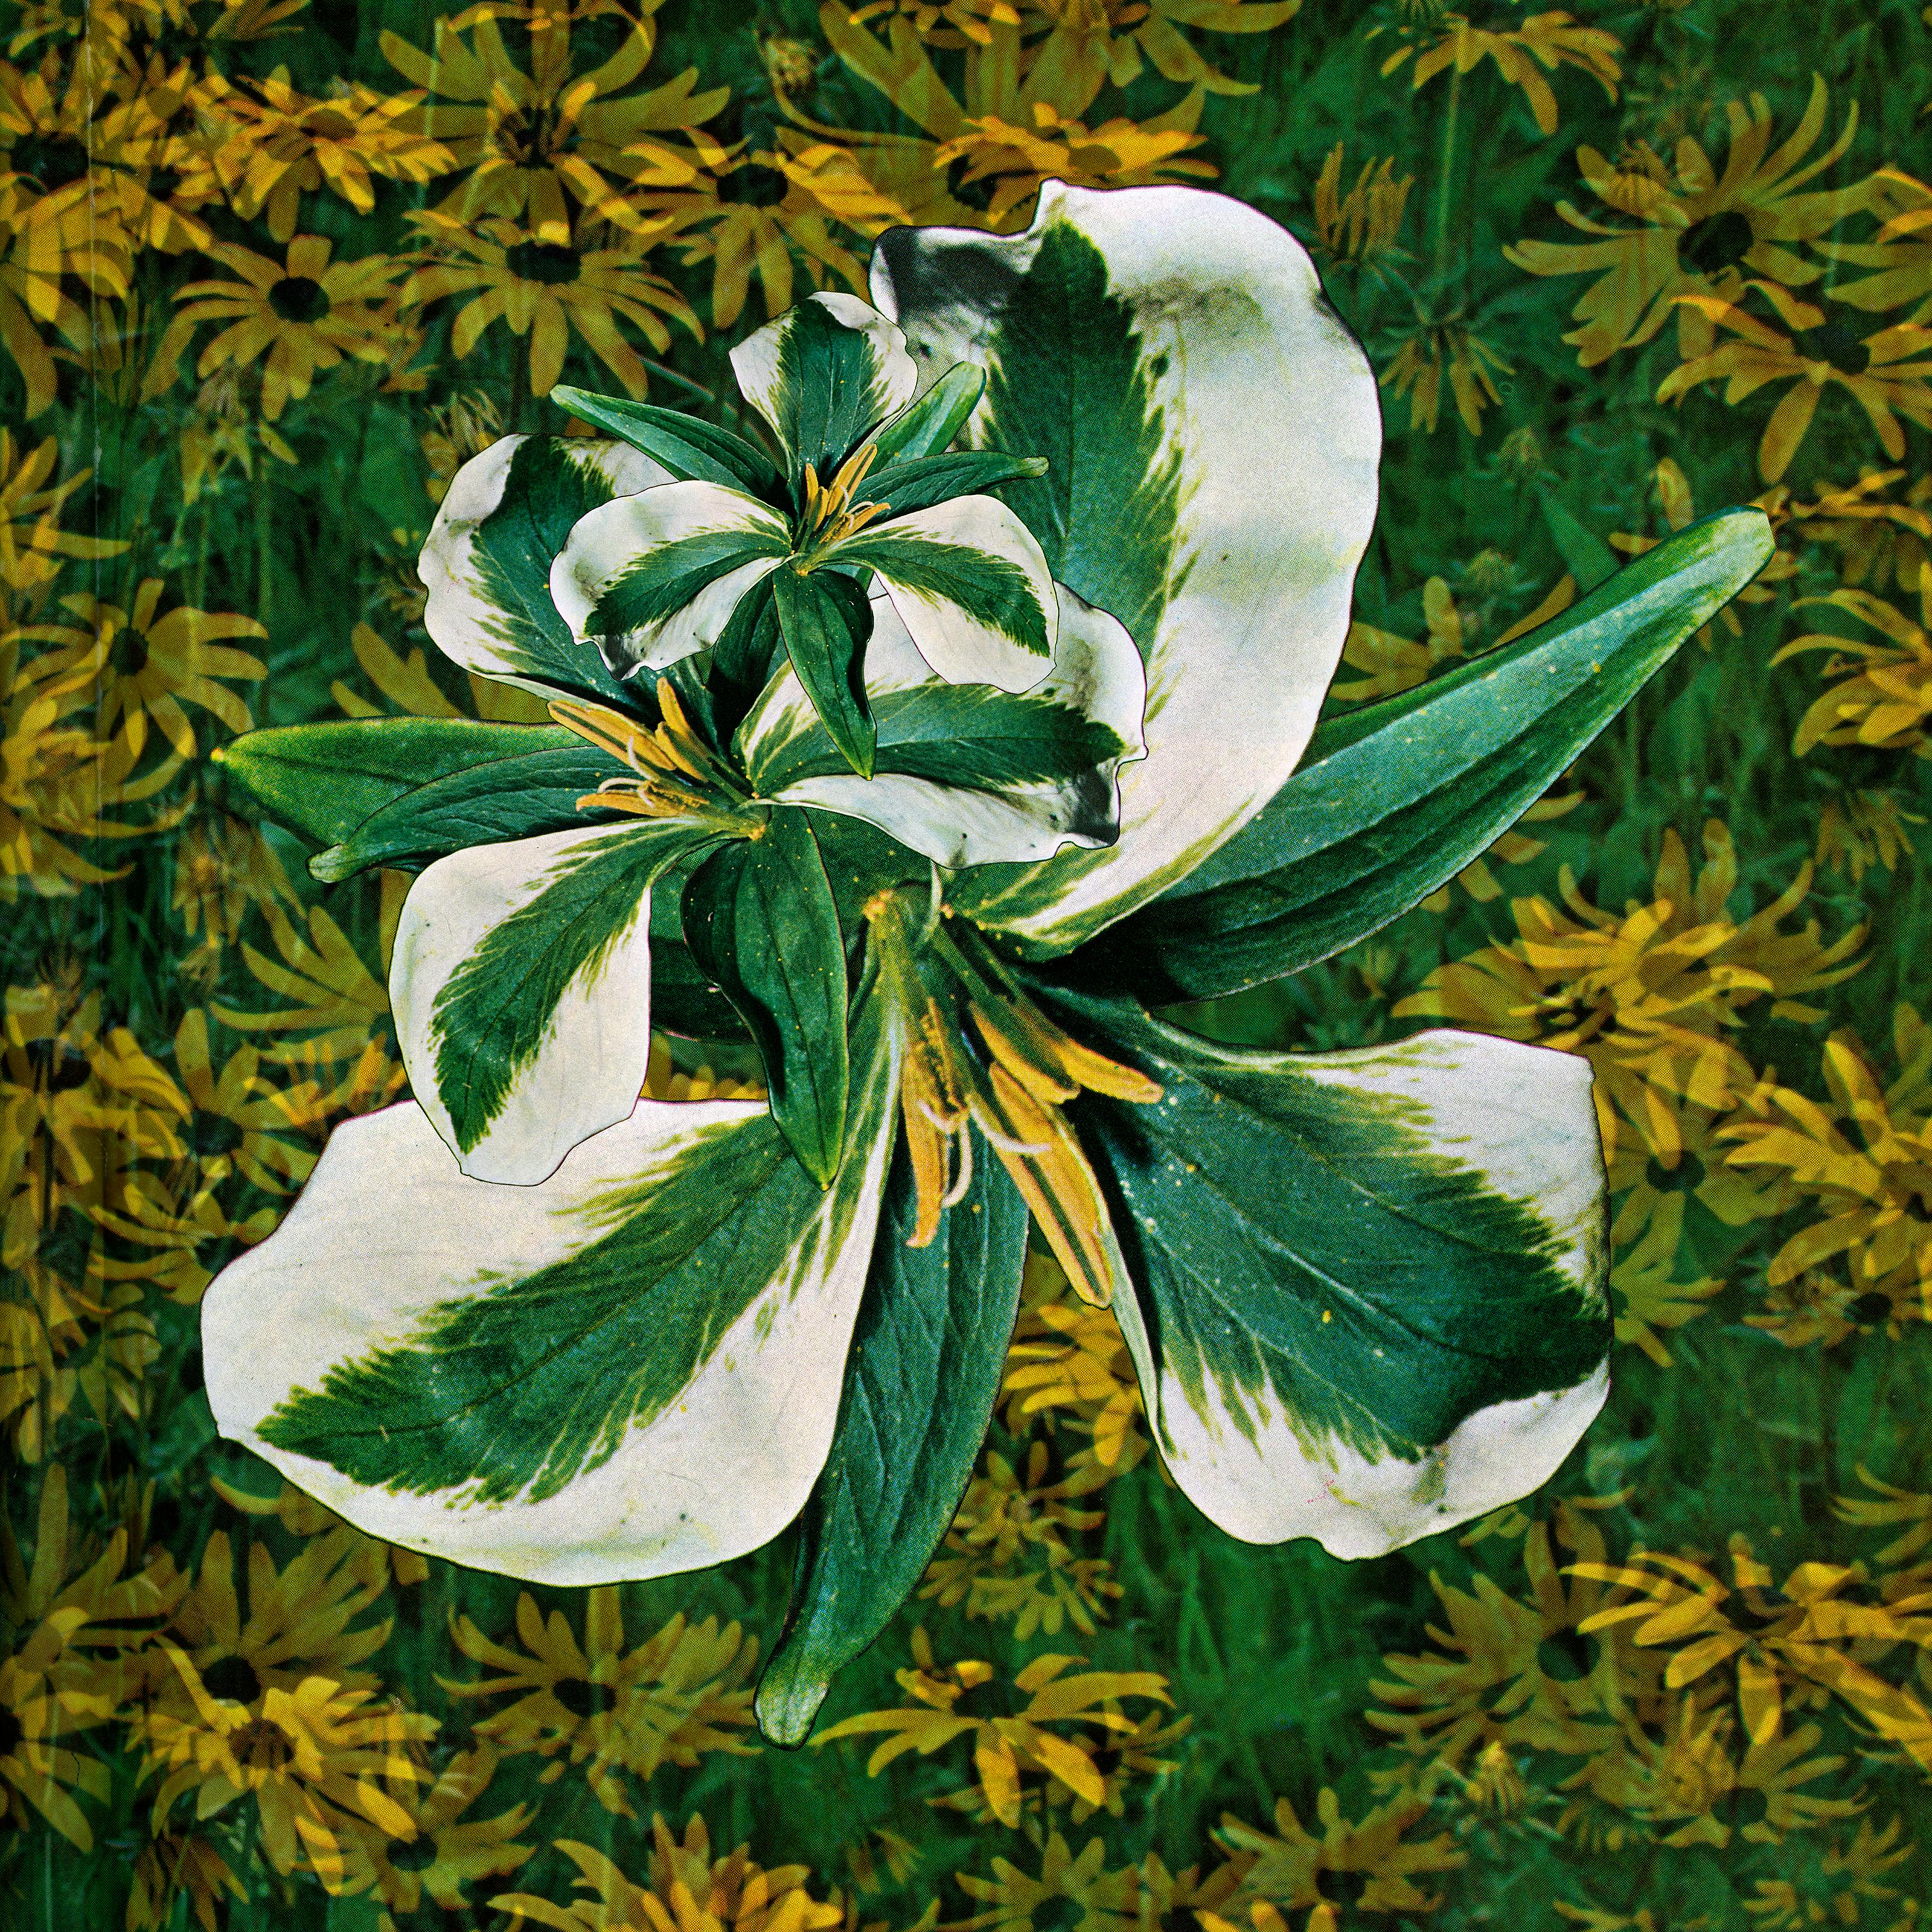 Trumpet Trumpet 02 - vibrant green and yellow floral collage print (12 x 12) - Print by Laura Kay Keeling 